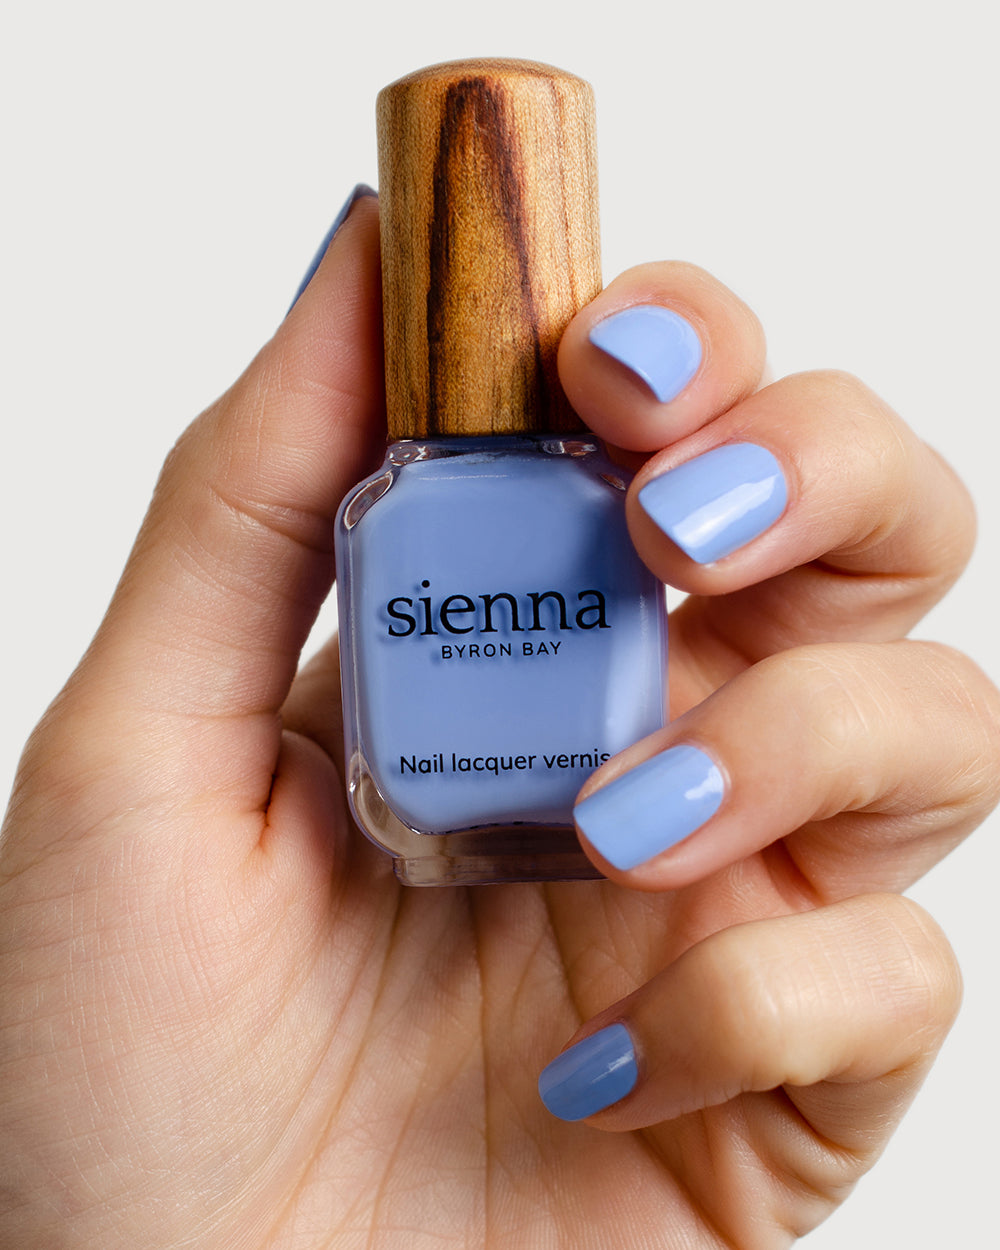 periwinkle blue nail polish hand swatch on fair skin tone holding a sienna bottle 